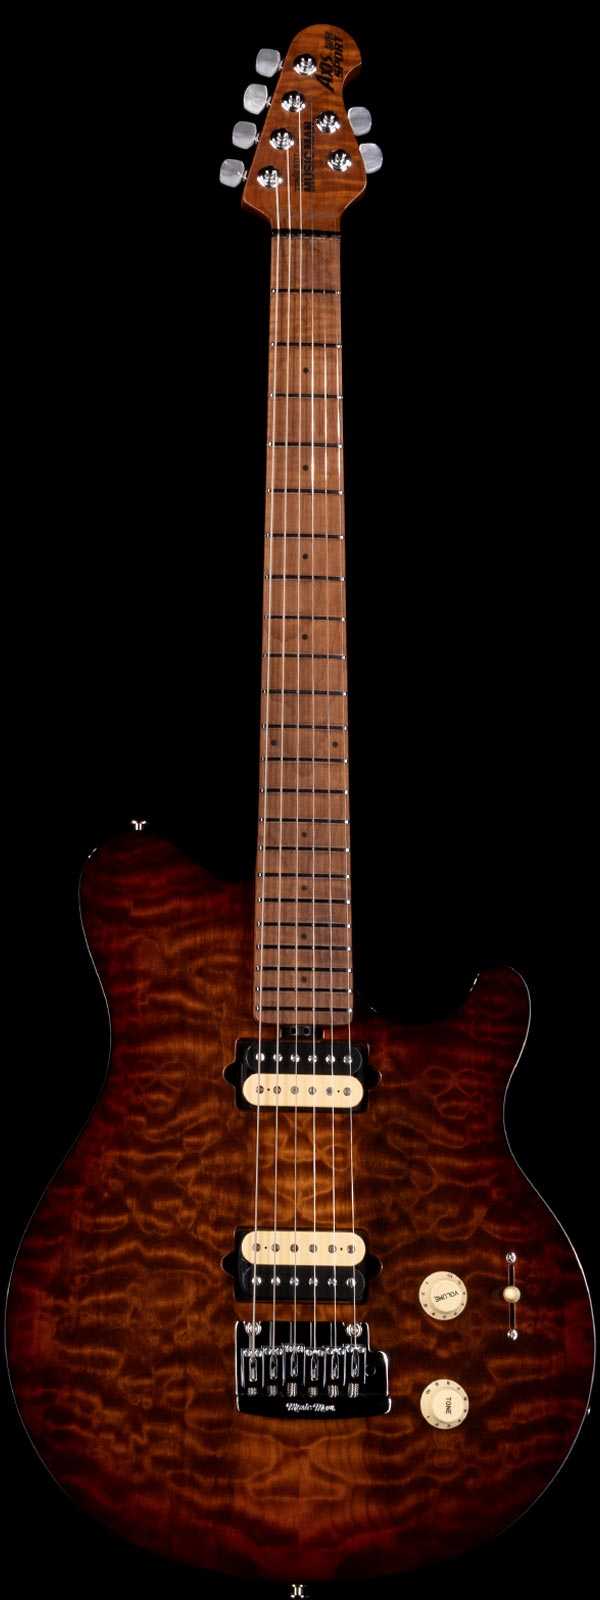 Ernie Ball Axis Super Sport Roasted Flame Maple Neck Roasted Amber Quilt